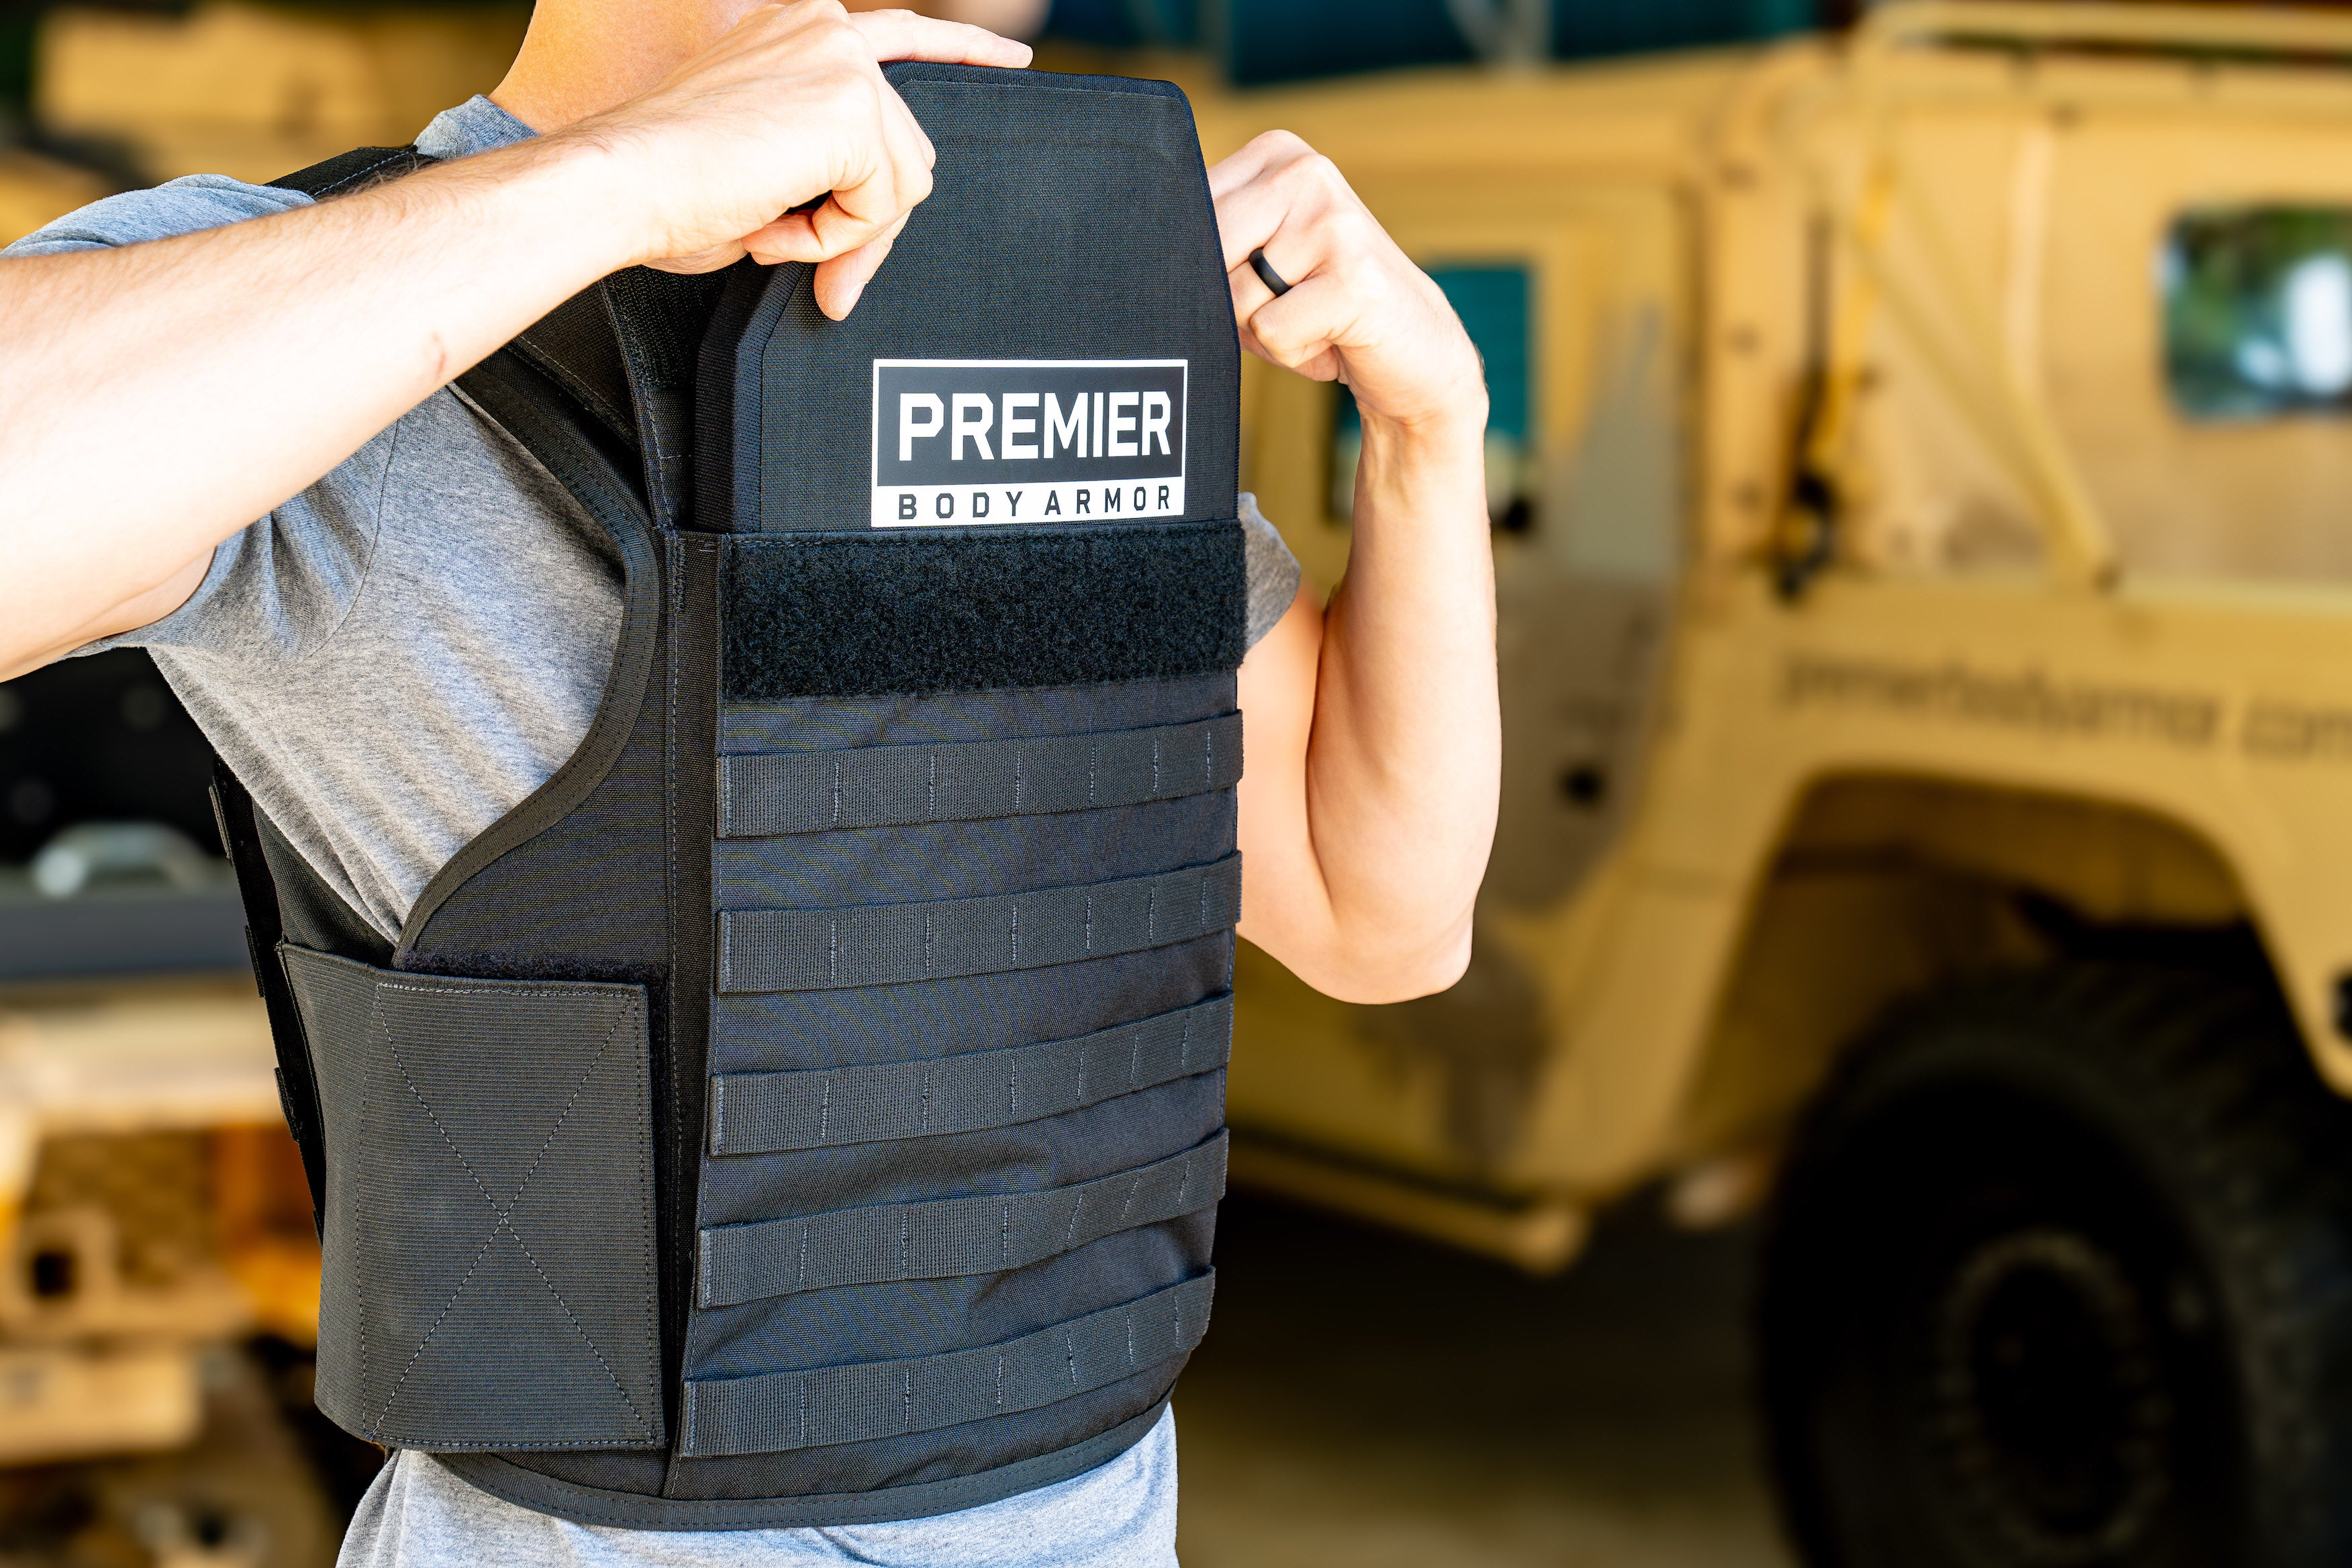 tactical level 3a body armor vest with rifle plate on front